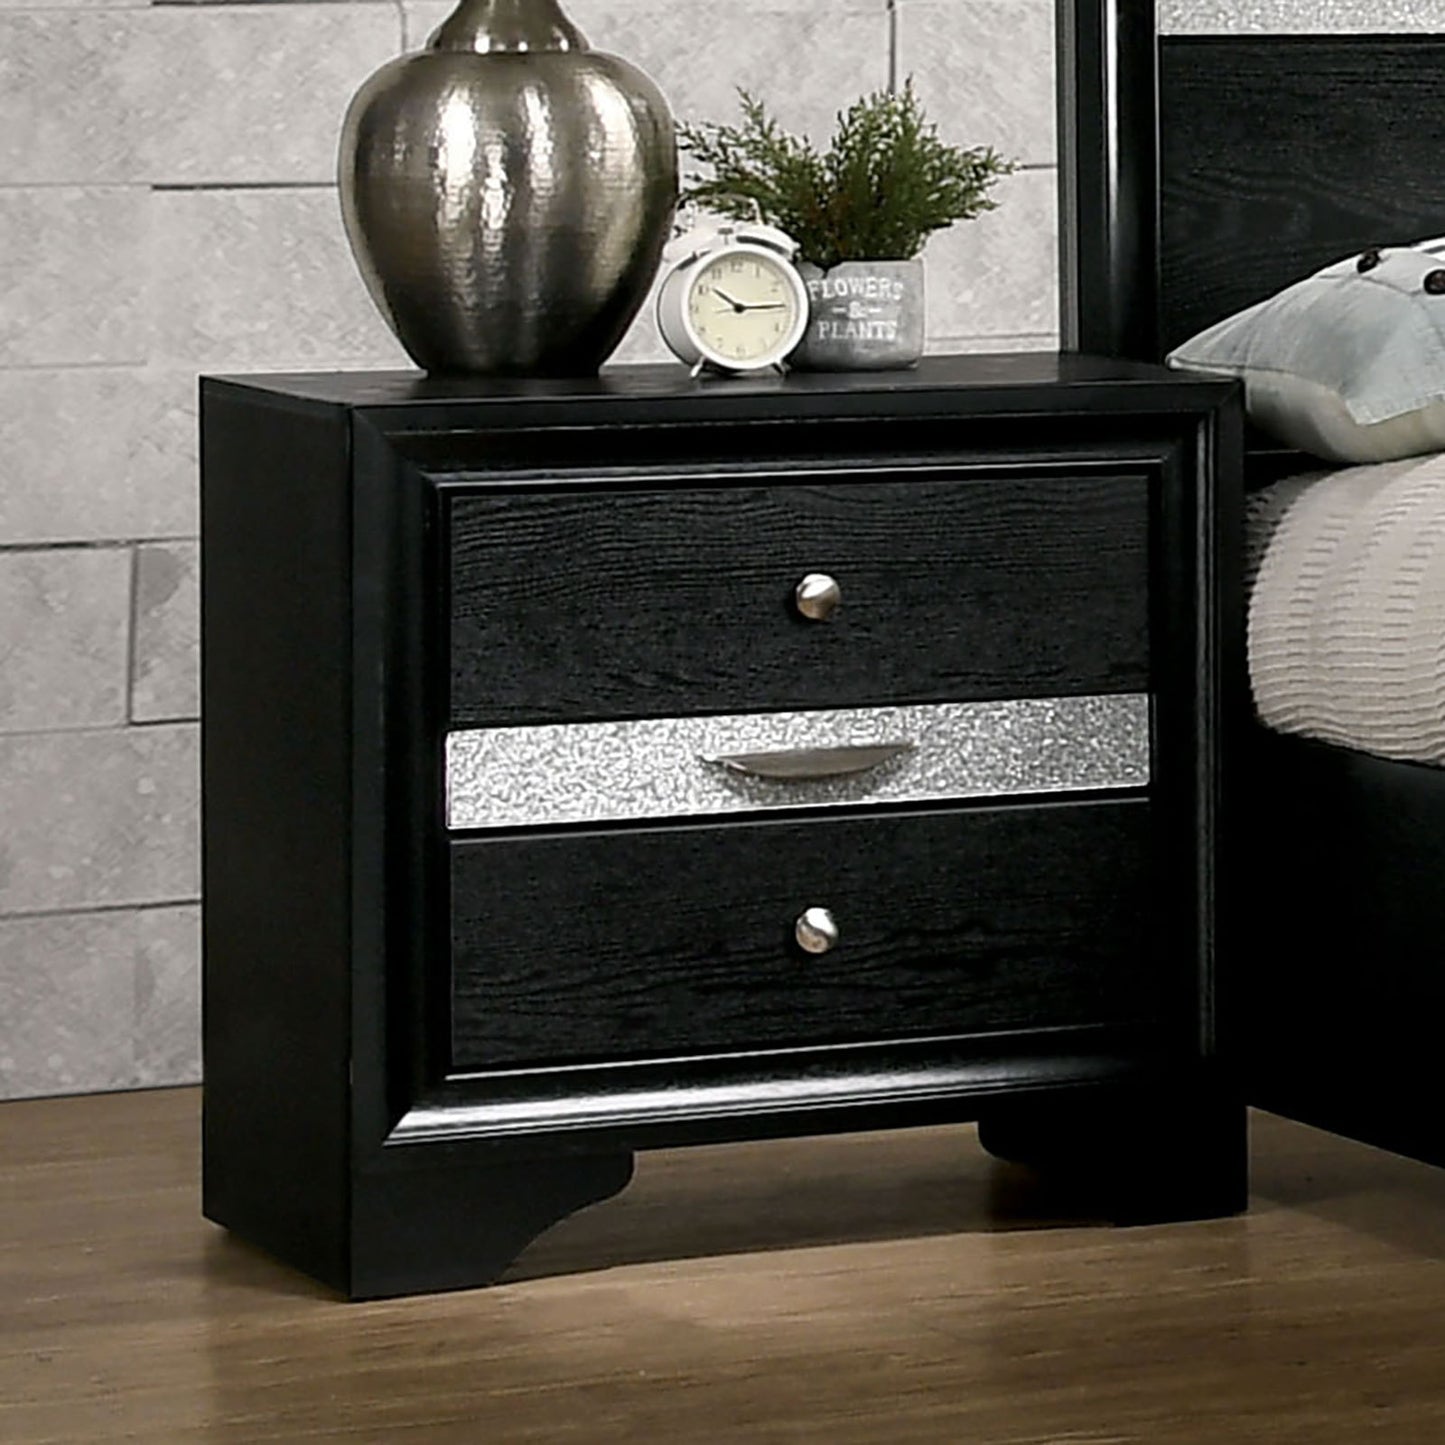 Contemporary 1pc Nightstand Black Finish Silver Accents Hidden Jewelry Drawer Nickel Round Knob Bedside Table Bedroom Furniture